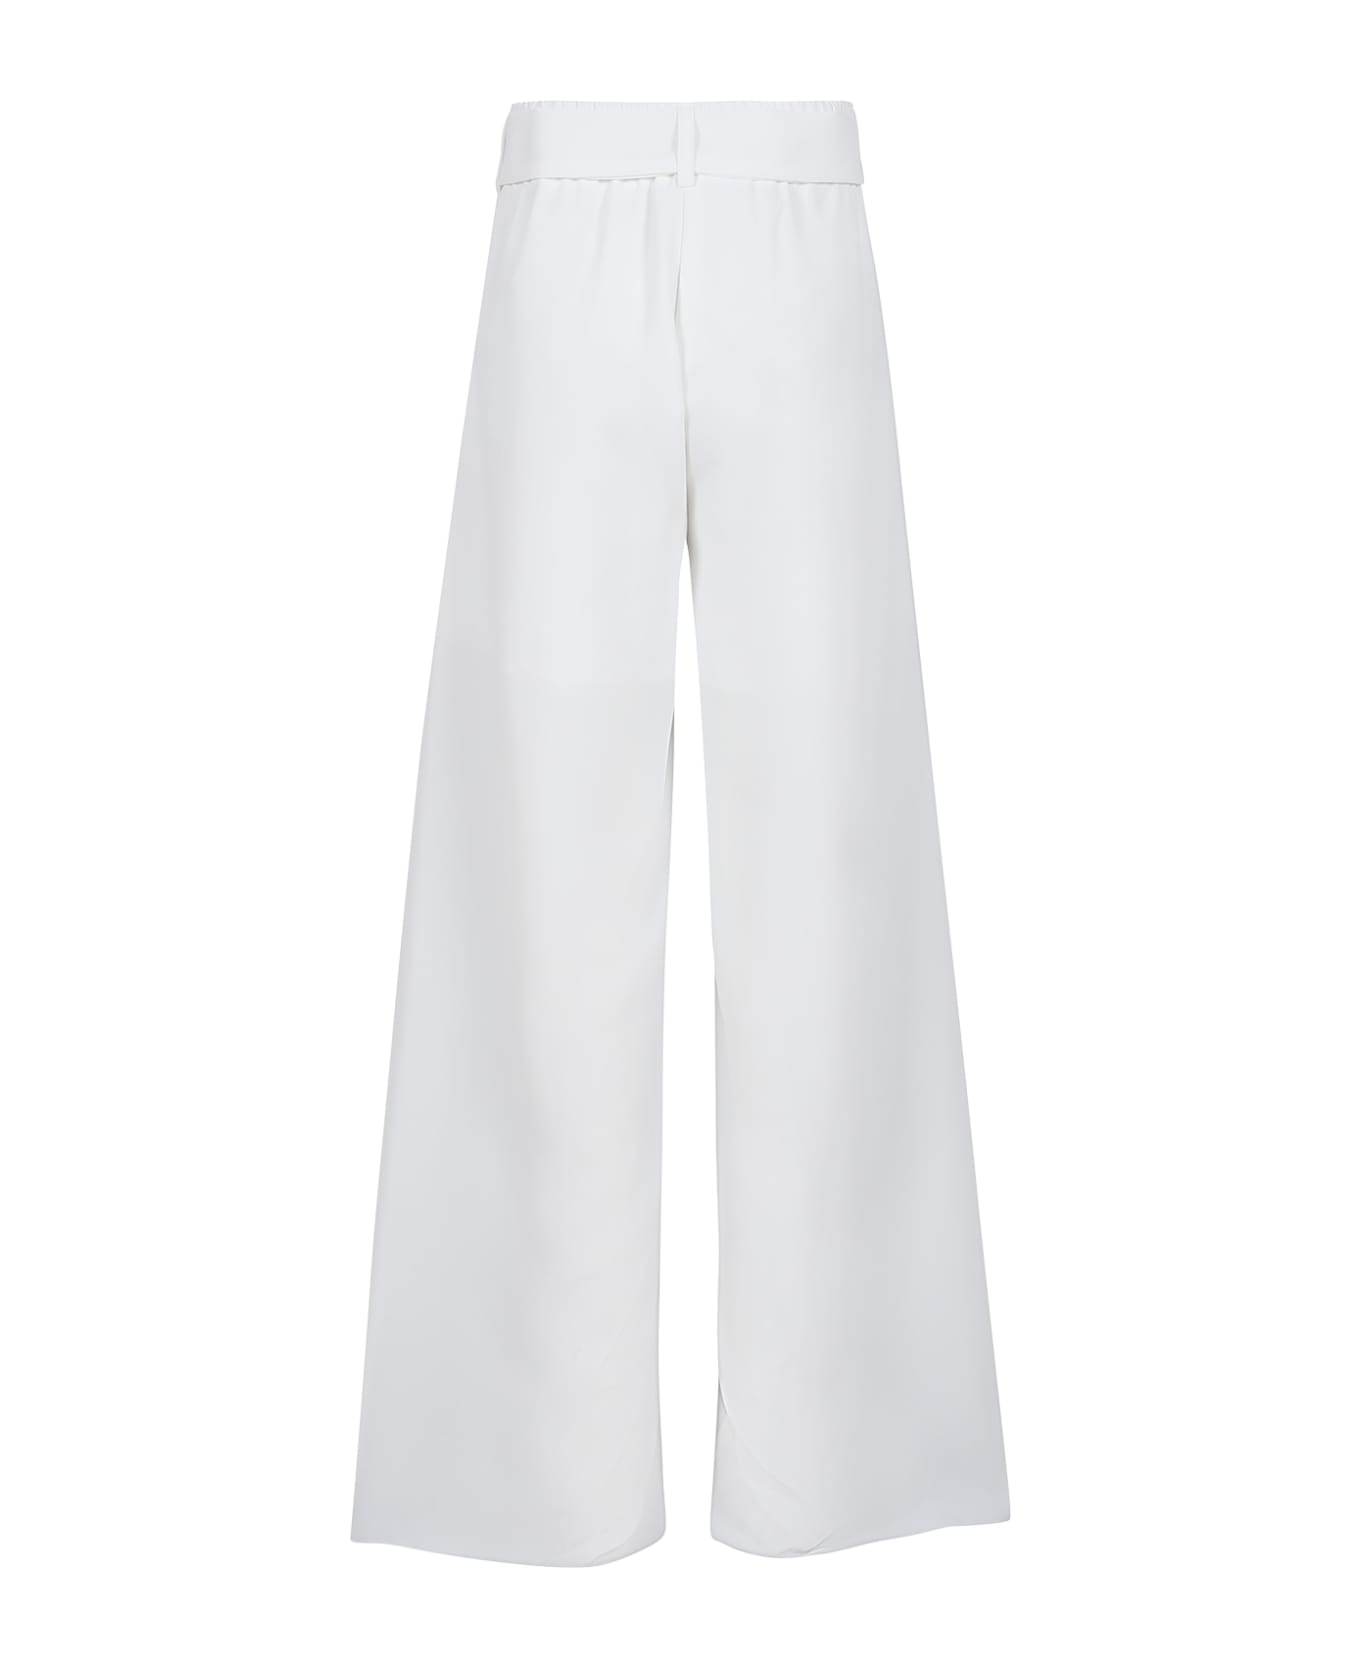 Monnalisa White Trousers For Girl With Bow Belt - White